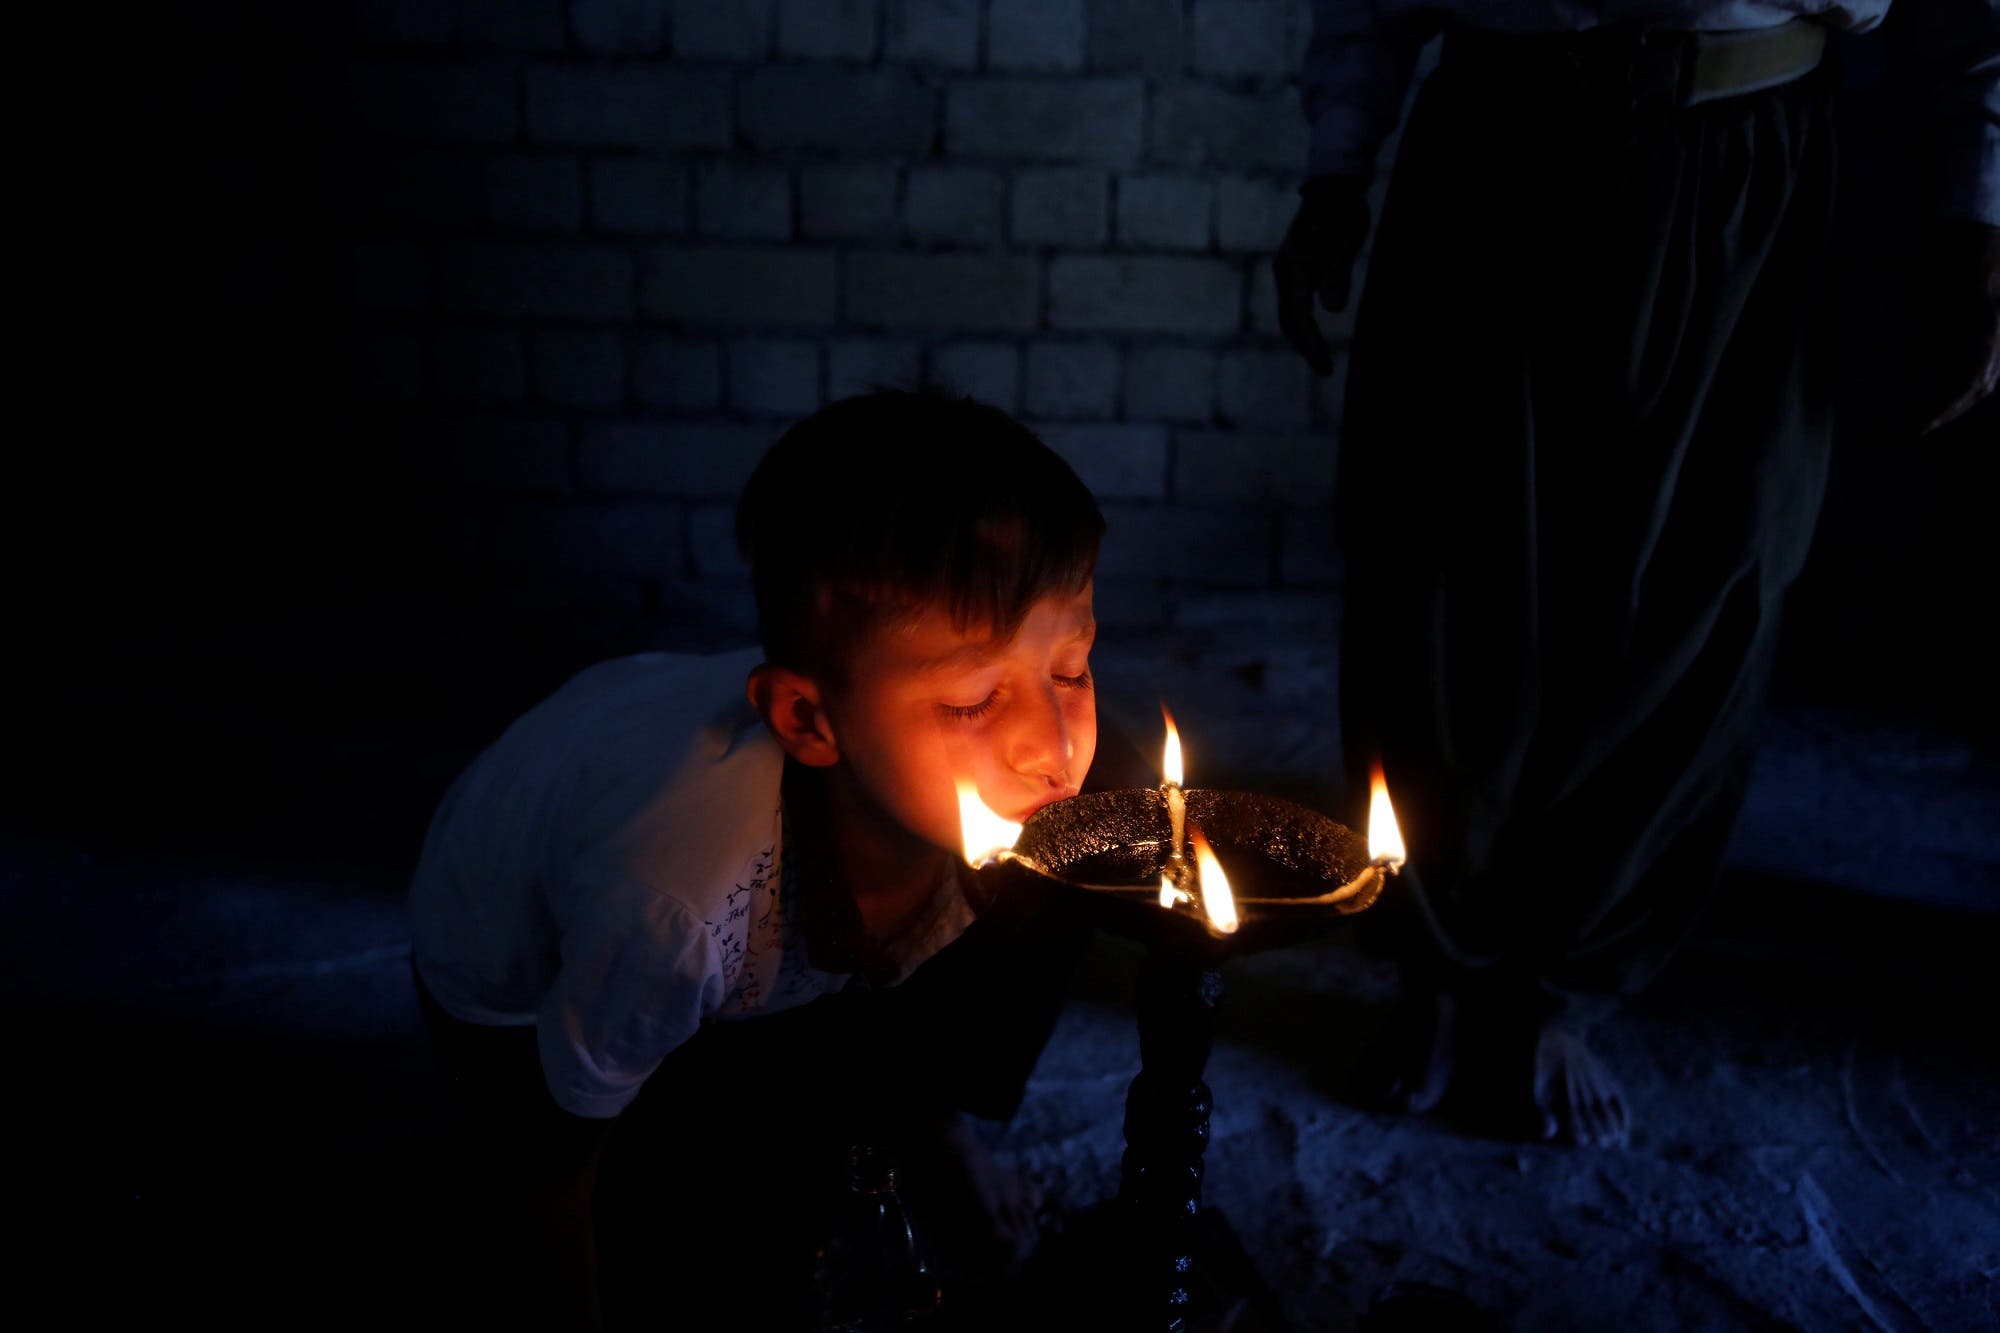 A boy from the minority Yazidi sect, worships at a Yazidi shrine which is being rebuilt after it was destroyed by ISIS, in Bashiqa, a town near Mosul, on August 8, 2017. (Reuters)